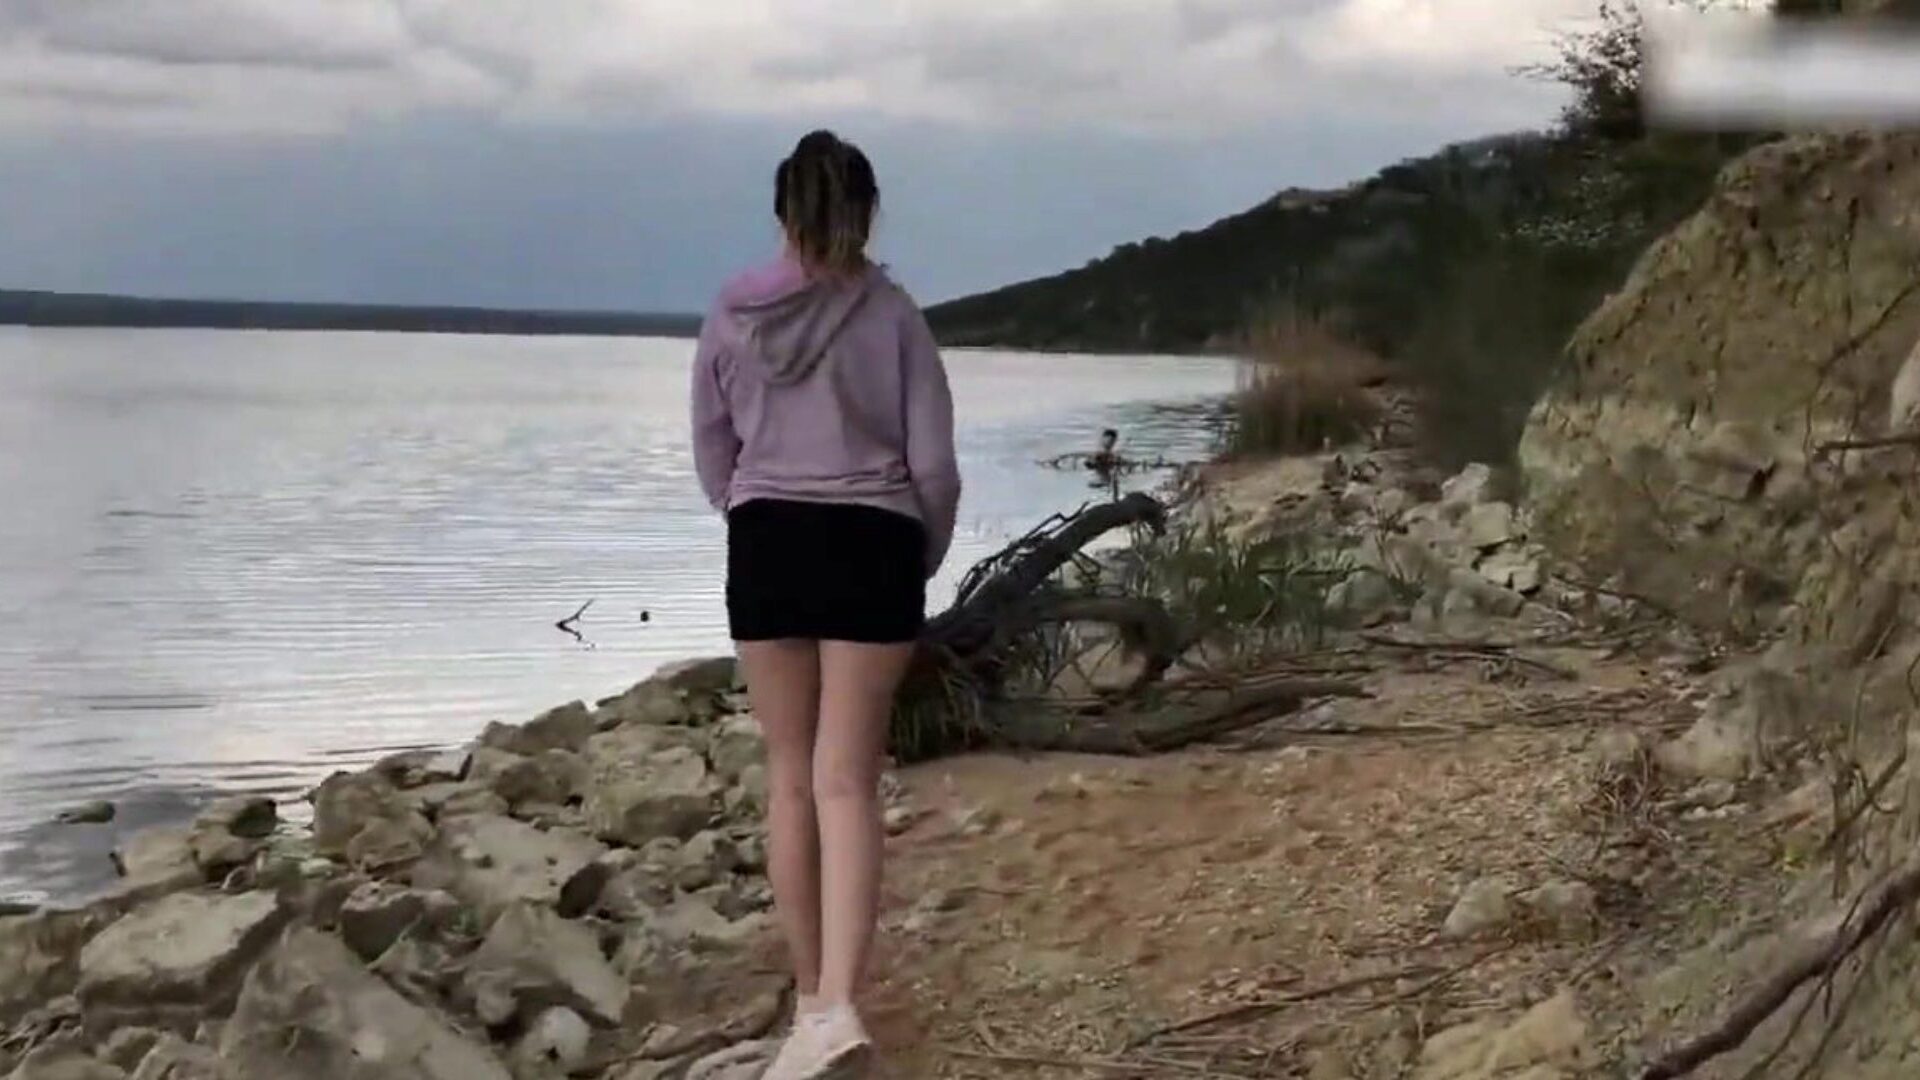 Risky Outdoor Sex Near the Lake Finished with Creampie | xHamster Watch Risky Outdoor Sex Near the Lake Finished with Creampie movie scene on xHamster - the ultimate bevy of free-for-all Russian Outdoor CFNM HD porno tube videos